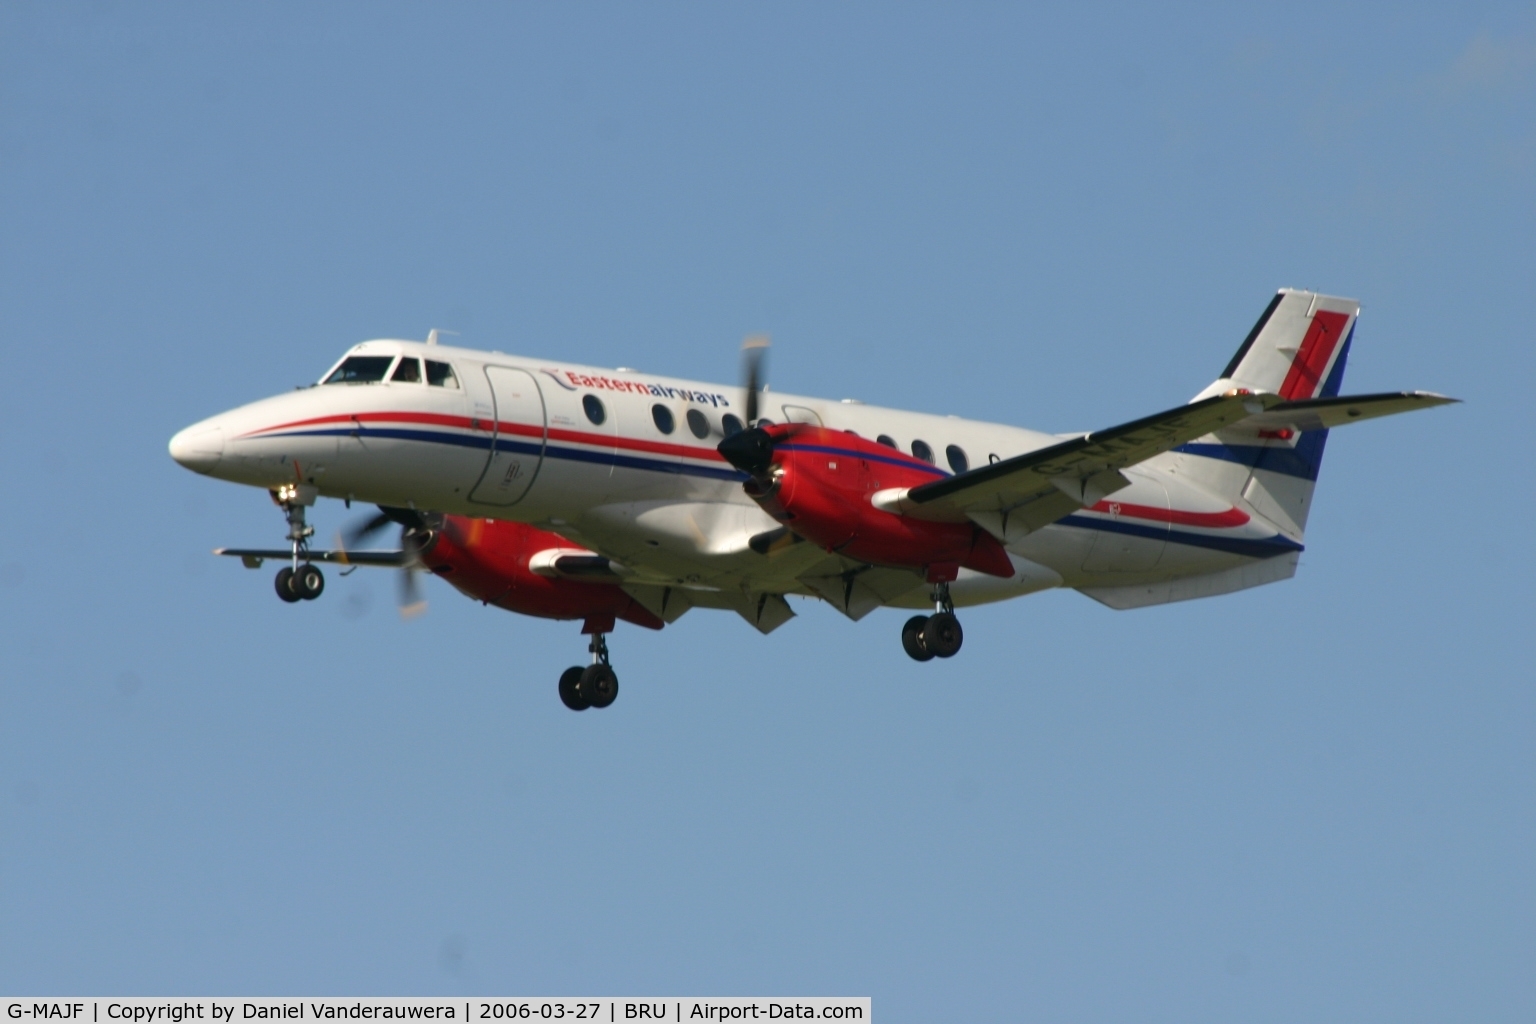 G-MAJF, 1992 British Aerospace Jetstream 41 C/N 41008, arrival in the after-noon